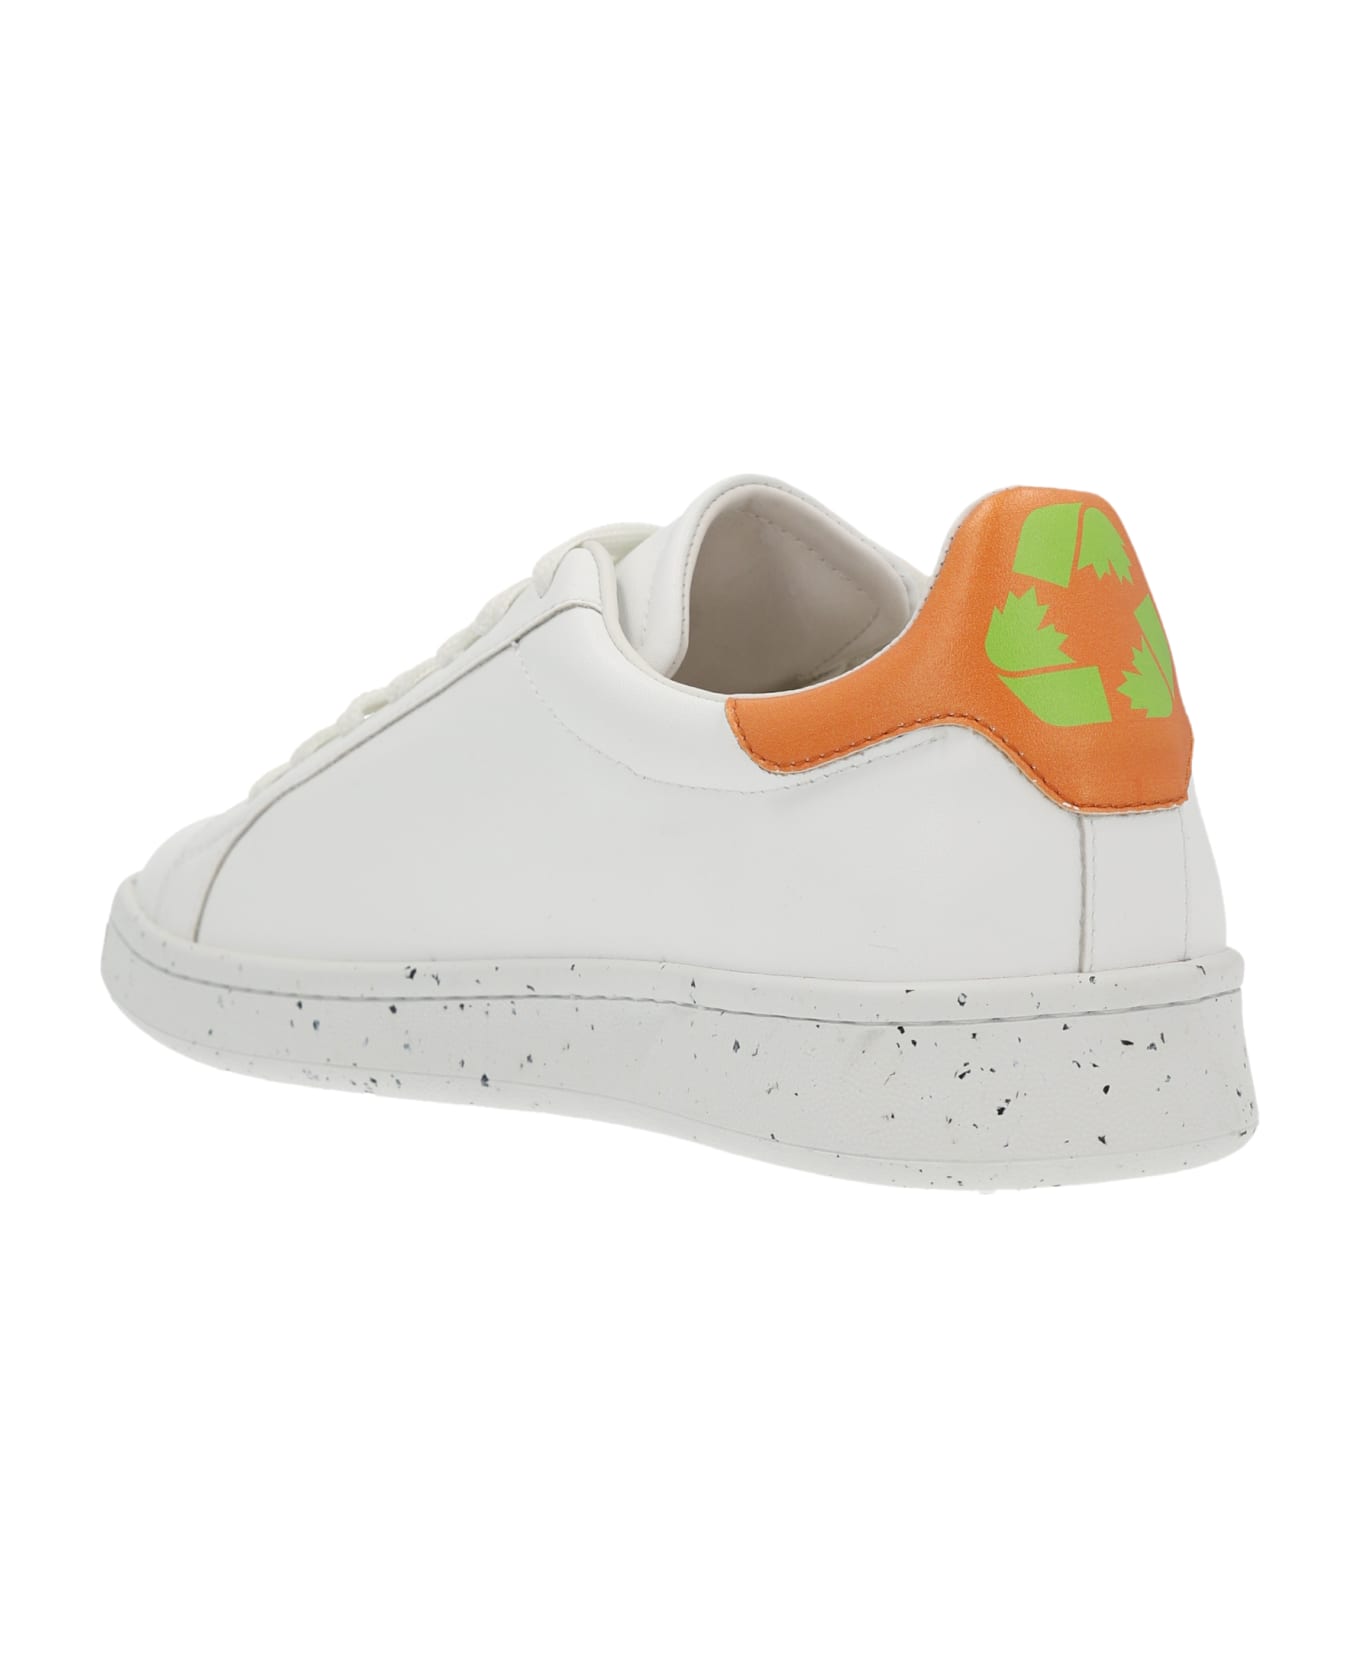 Dsquared2 'one Life One Planet  Sneakers - White